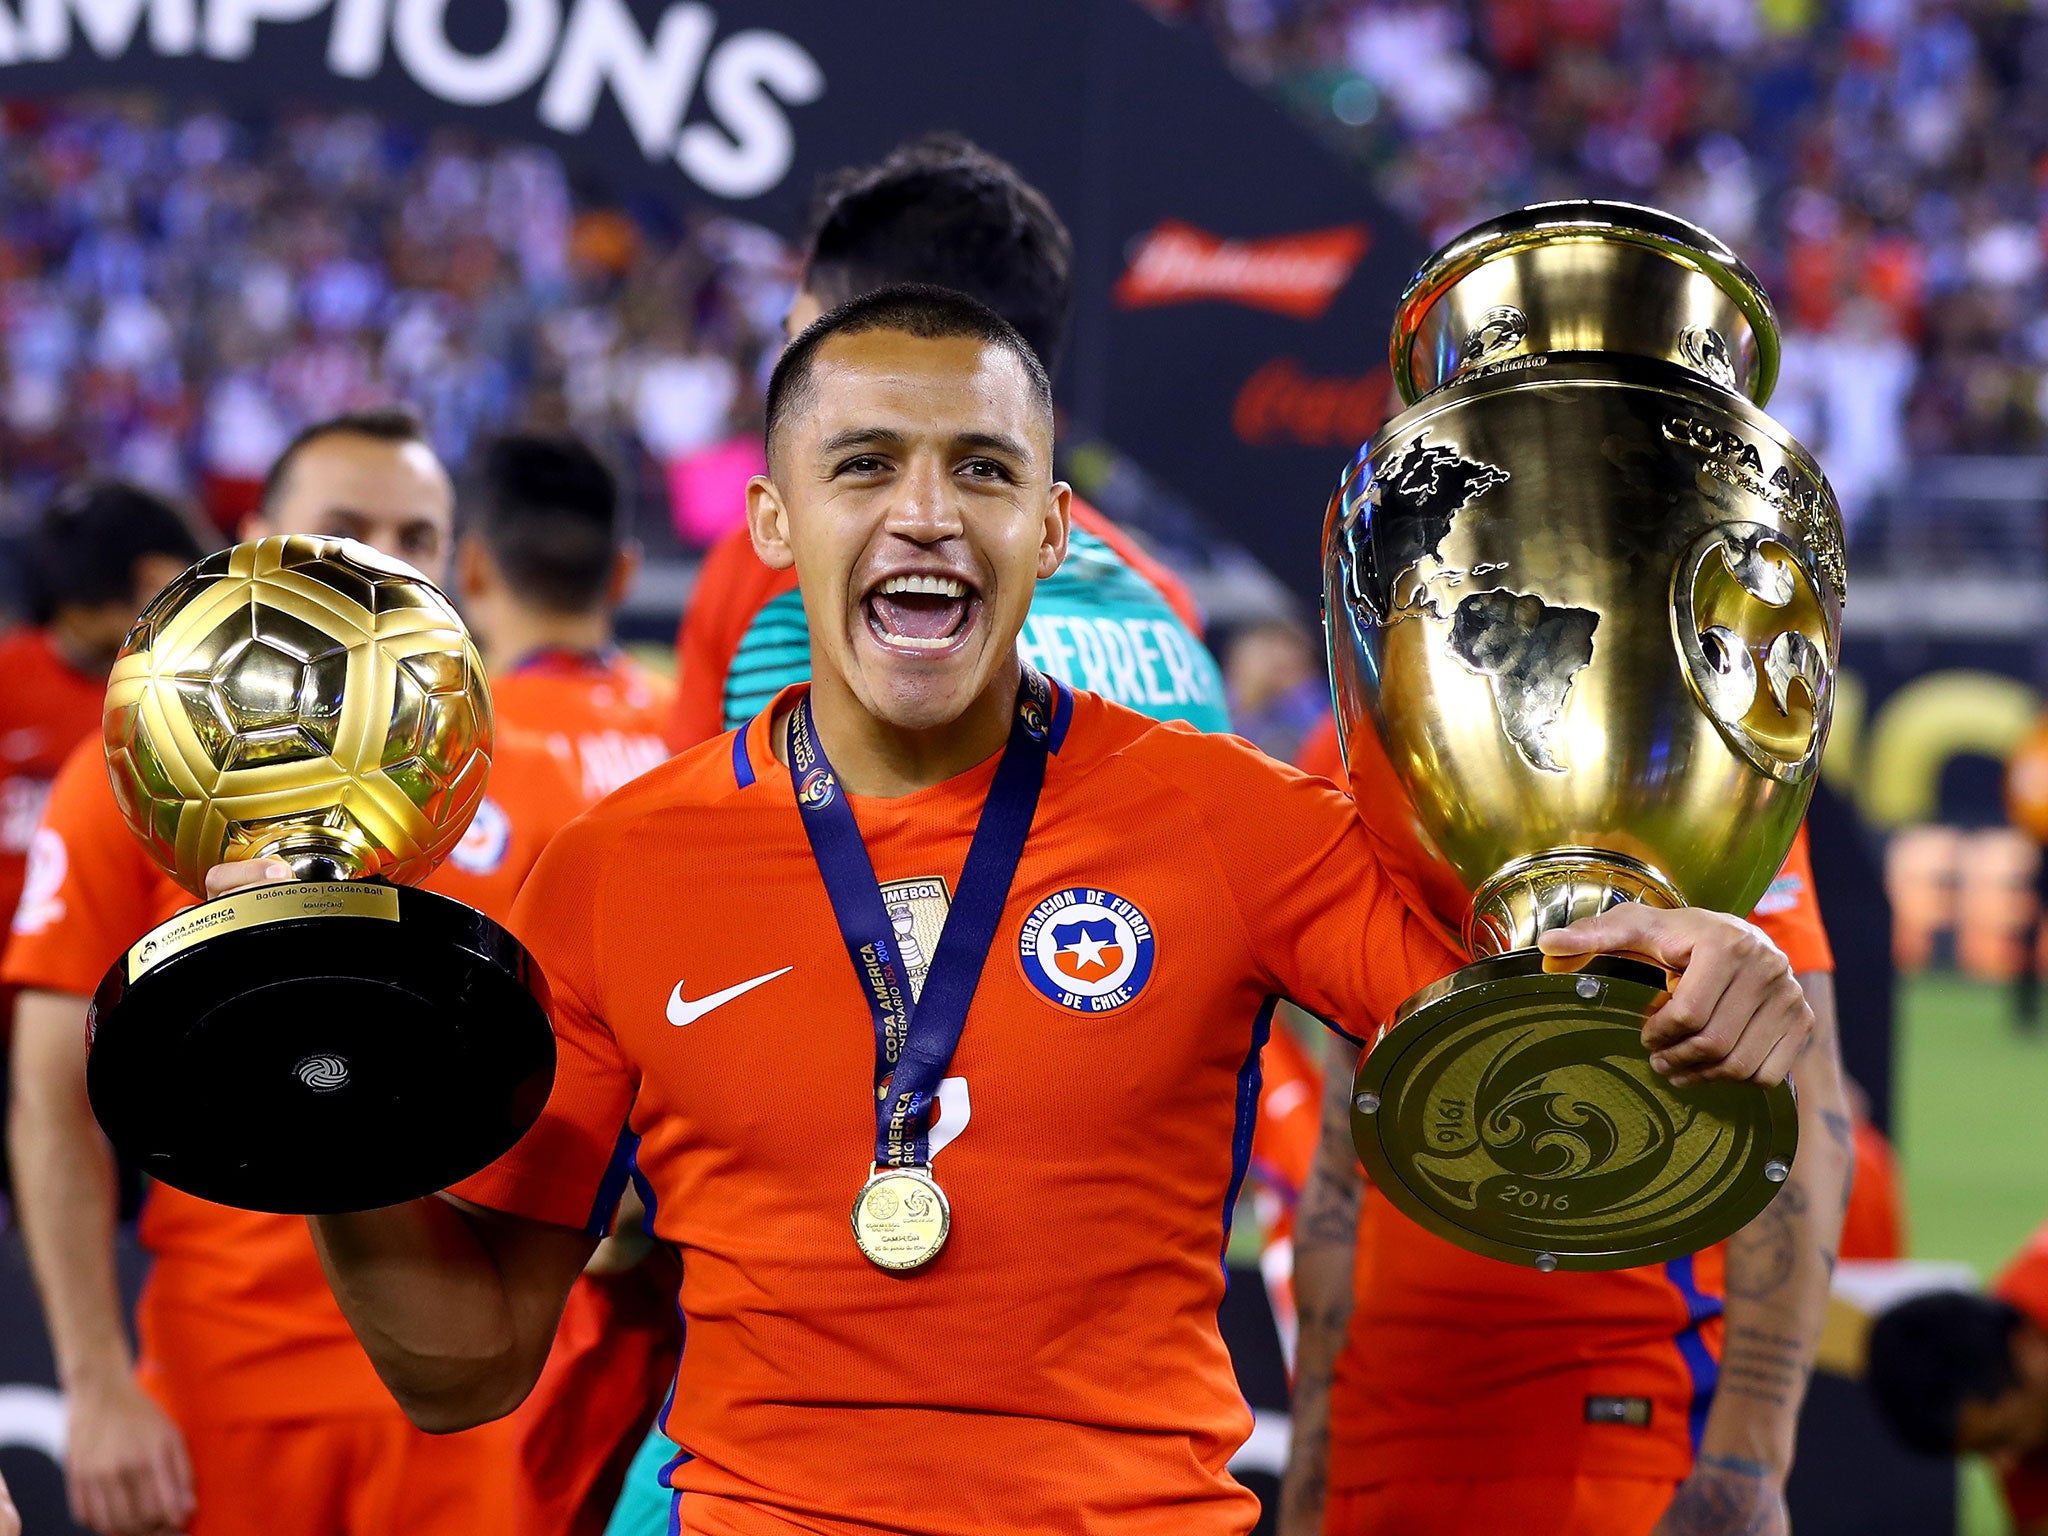 Alexis Sanchez helped guide Chile to Copa America glory